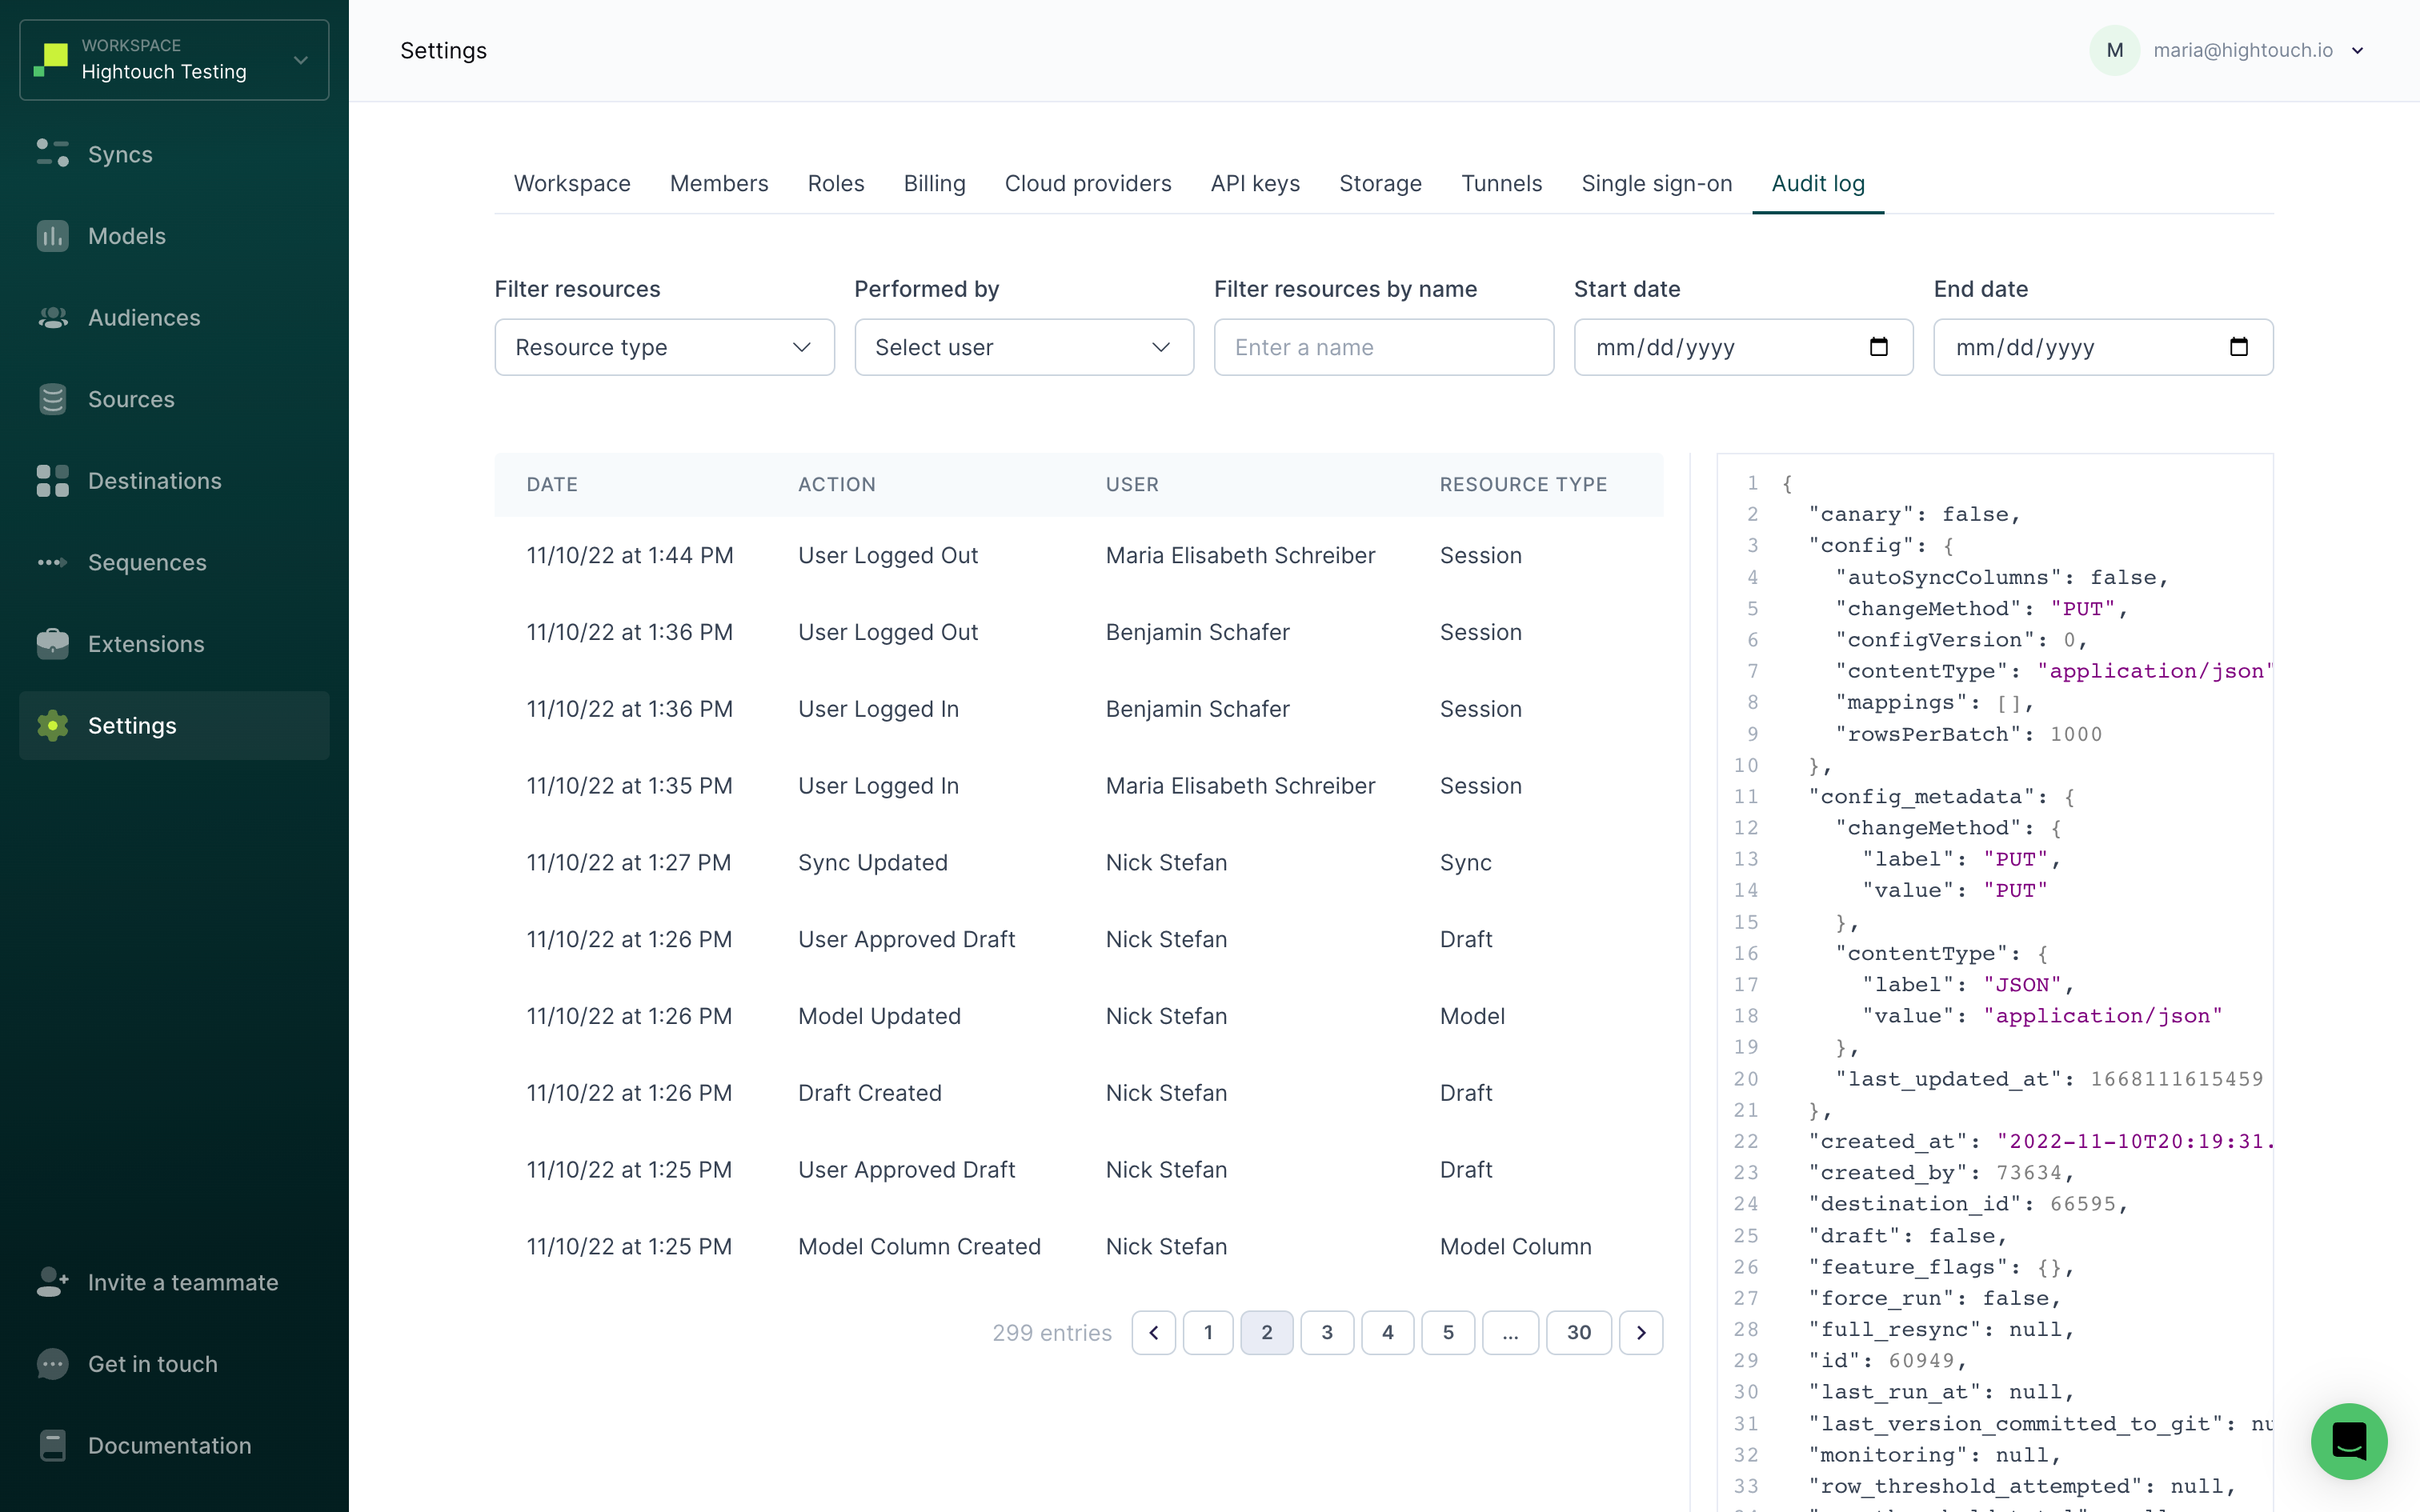 Audit log table in the Hightouch UI